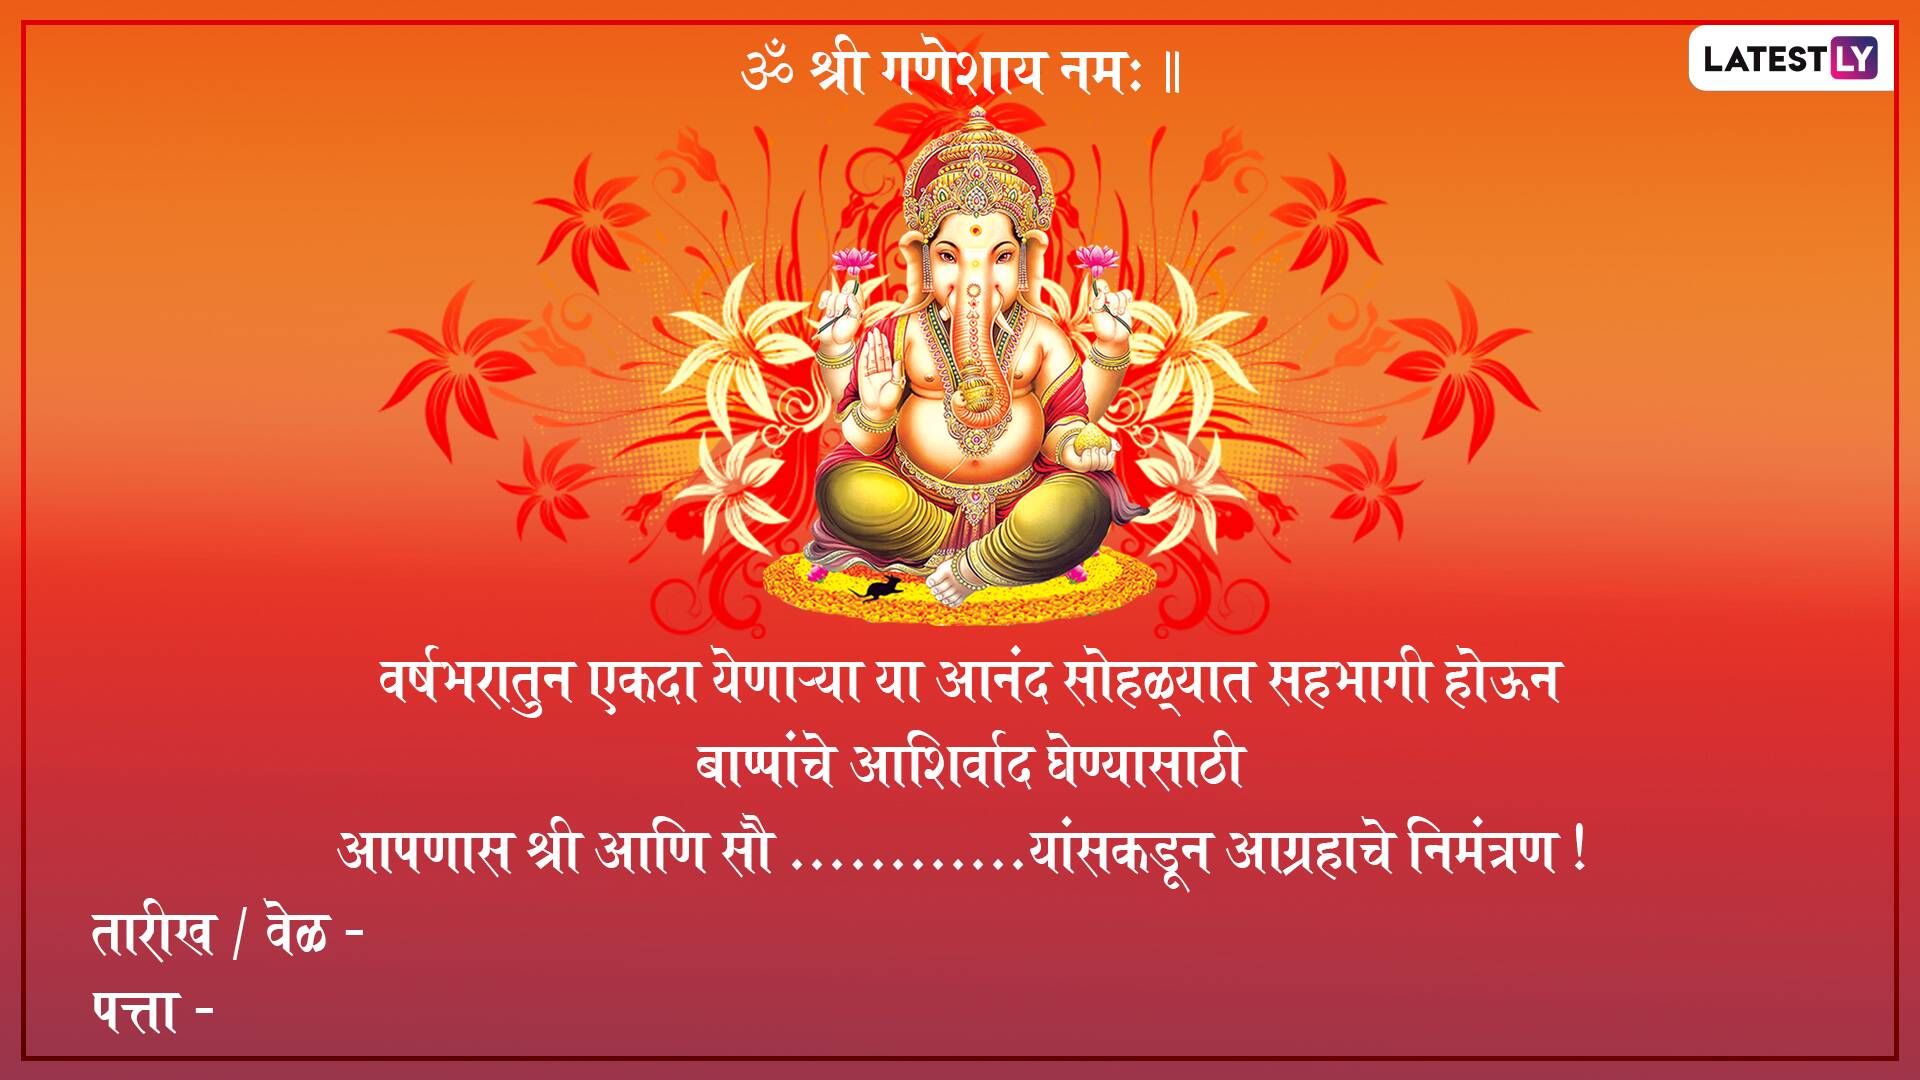 Ganesh Chaturthi 2021 Invitation Card Format With Messages in Marathi:  WhatsApp Status and Images To Invite Friends and Family for Ganpati Darshan  | ?? LatestLY